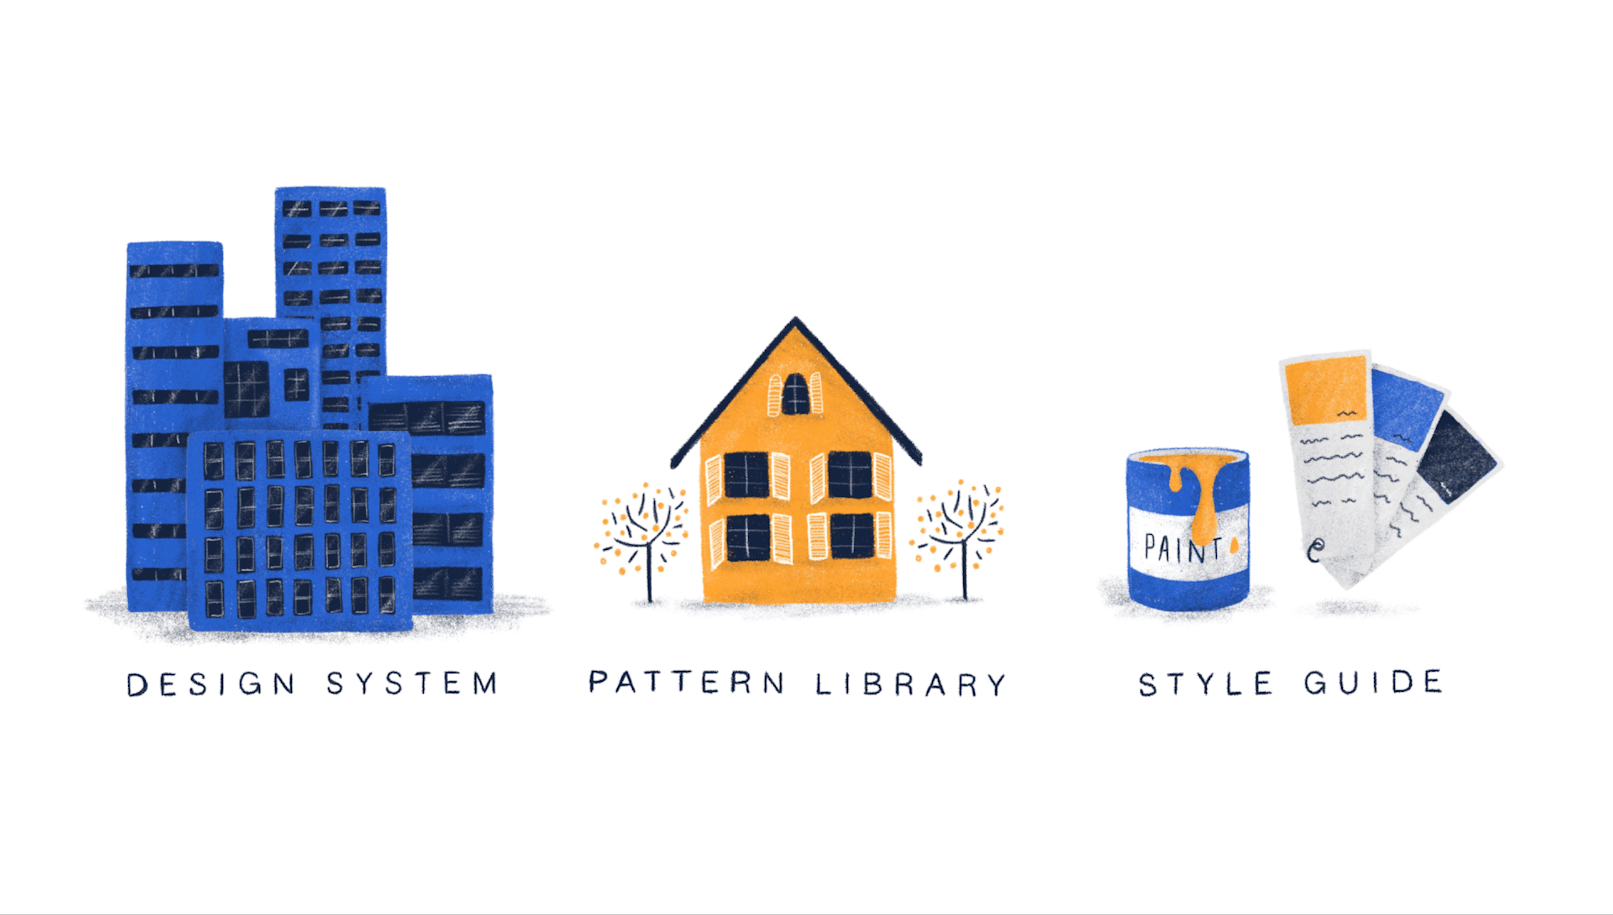 Making sense of Design Libraries, Design Systems, Pattern Libraries and Styleguides.